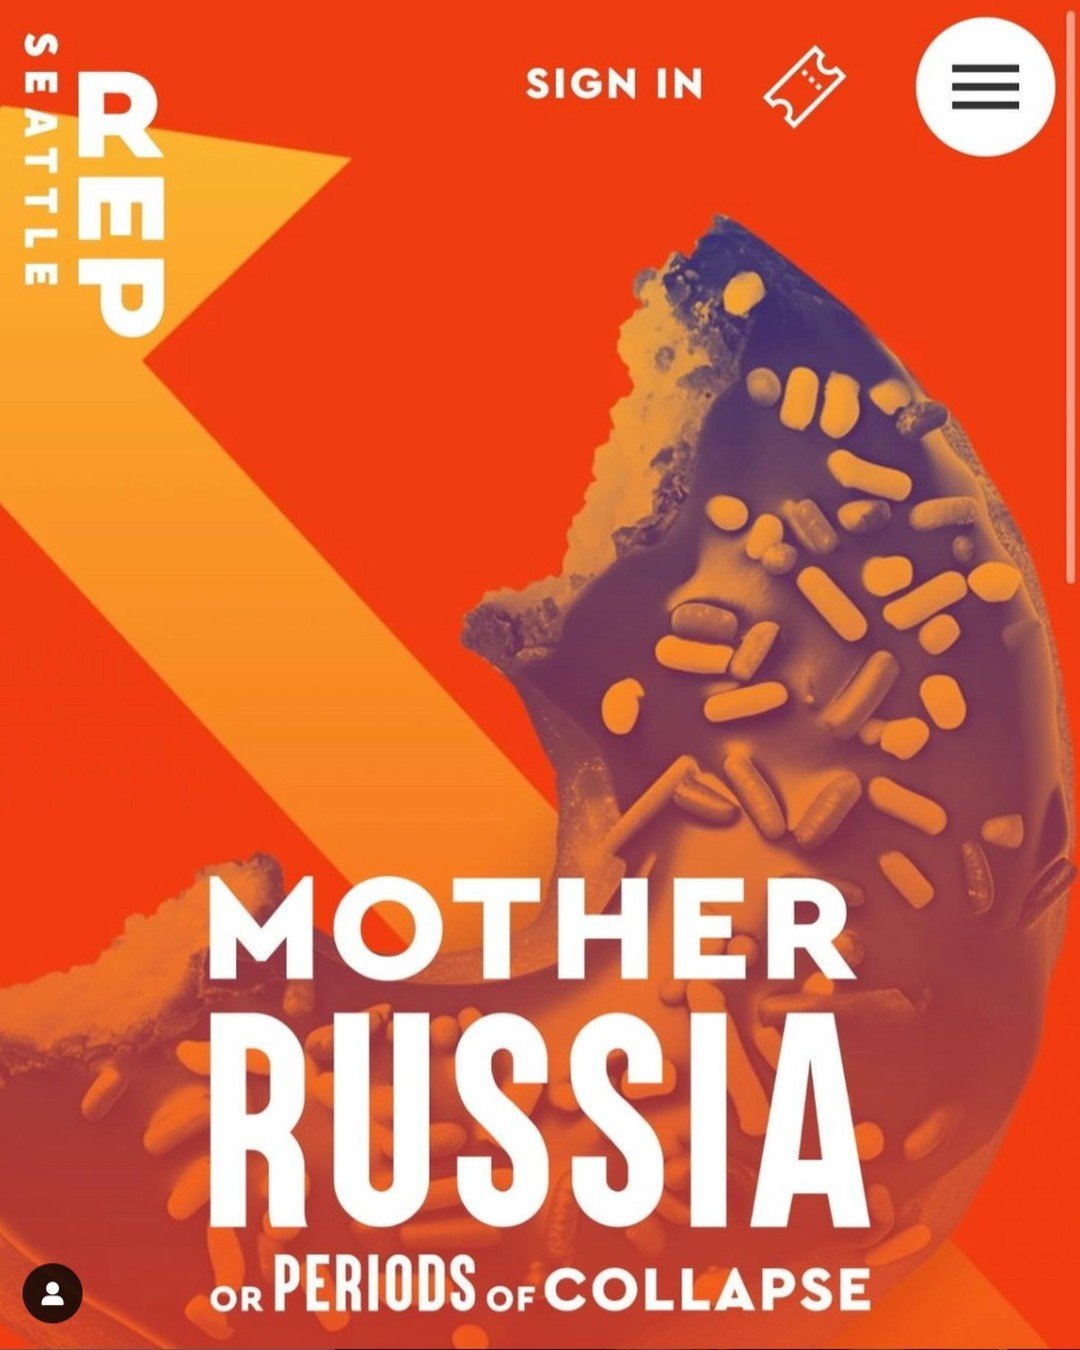 Congratulations to our 2024 Art &amp; Action Dinner Honoree @mslaurenyee! Her new comedy MOTHER RUSSIA OR PERIODS OF COLLAPSE will receive its world premiere at @seattlerep in March 2025.

ABOUT THE PLAY
Euvgeny and Dmitri are just two average guys w